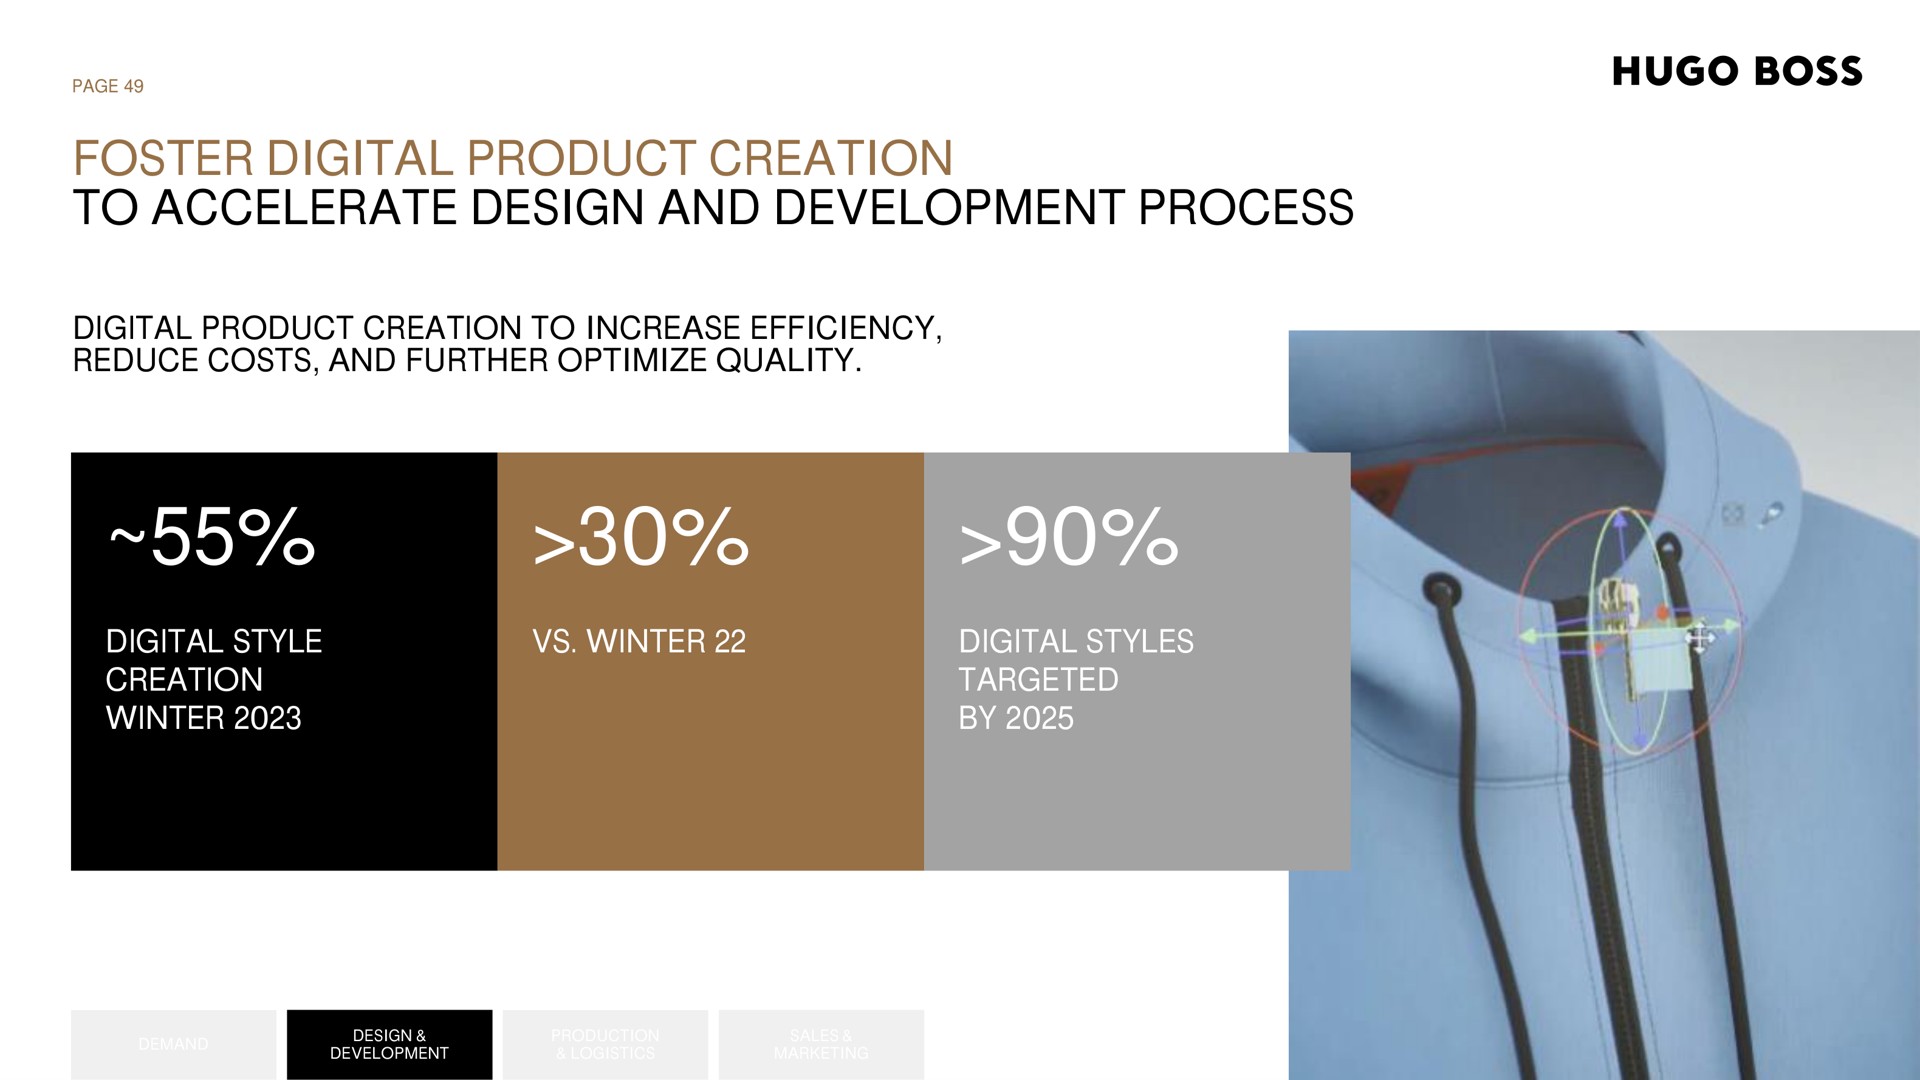 foster digital product creation to accelerate design and development process boss increase efficiency reduce costs further optimize quality | Hugo Boss